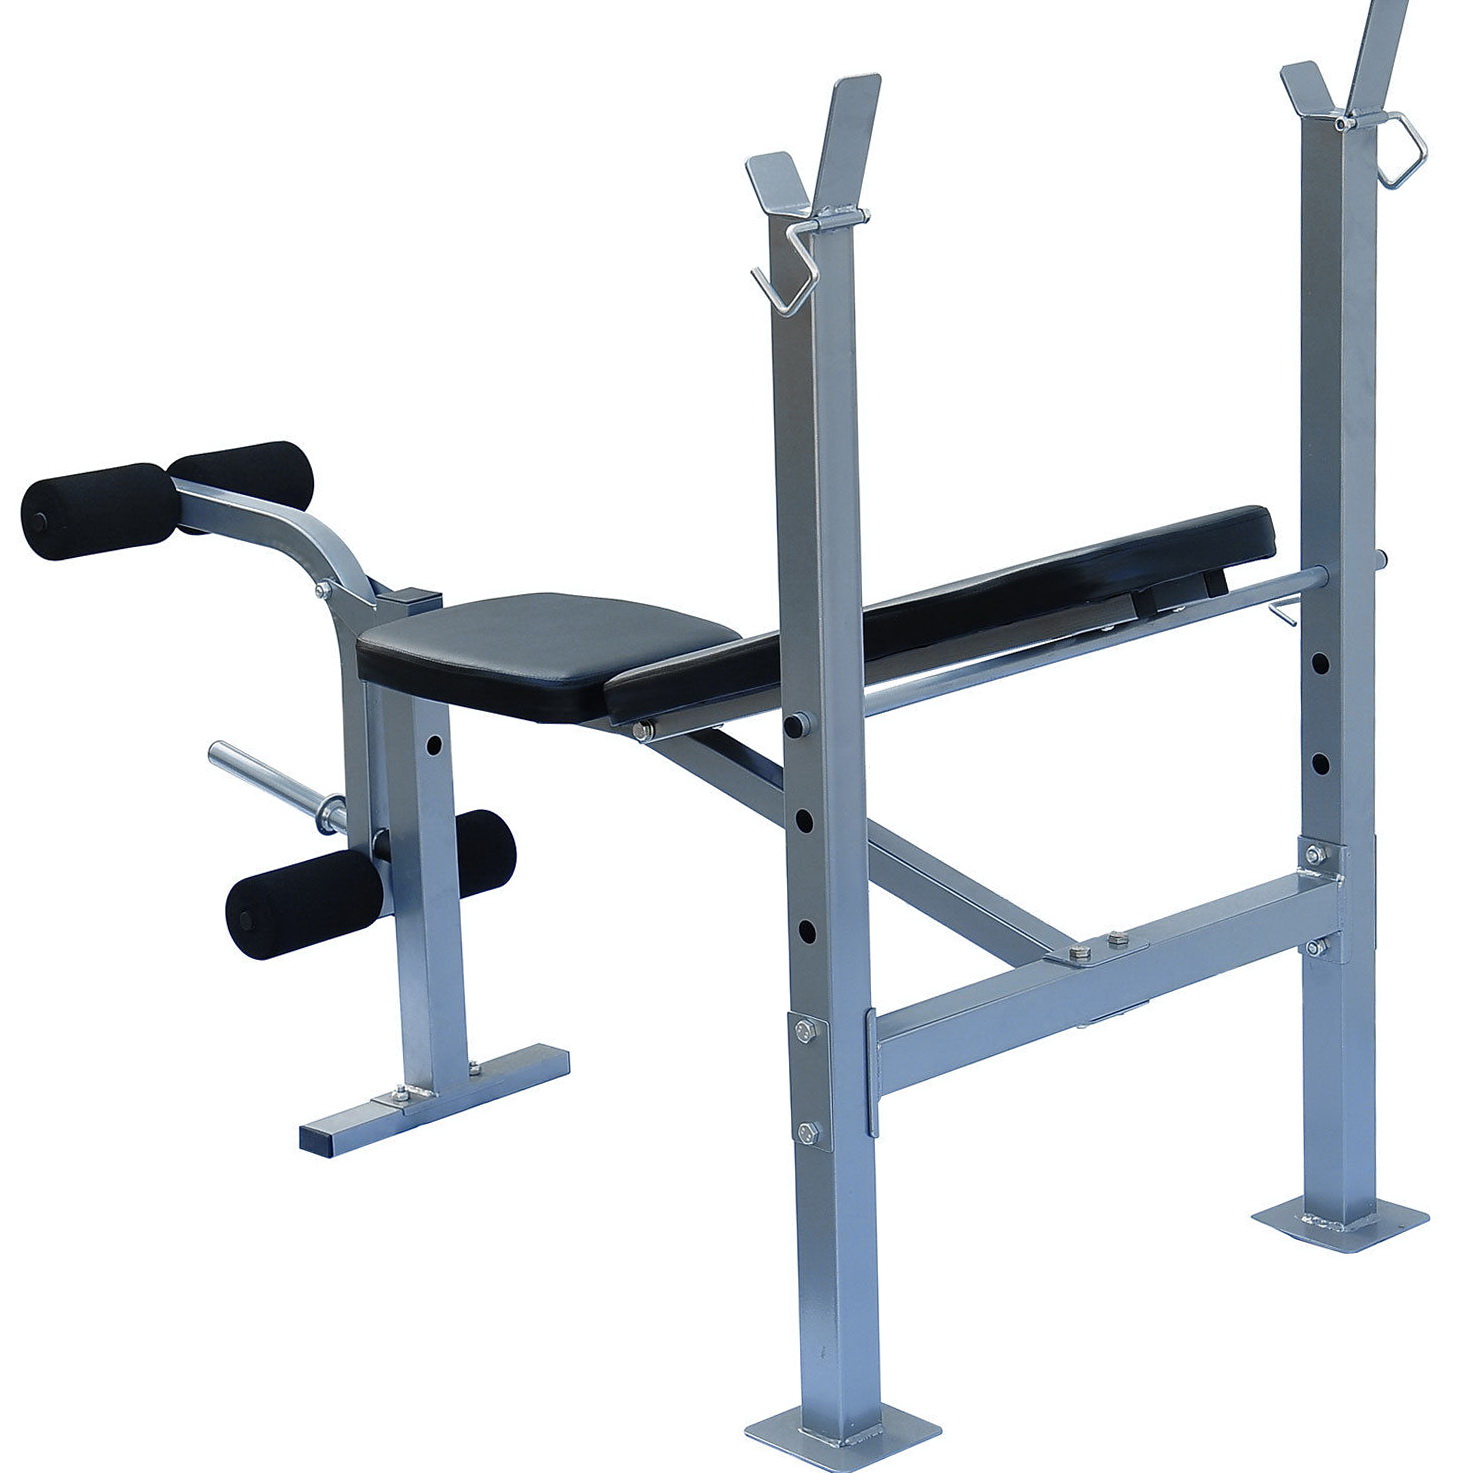 Adjustable Weight Bench With Leg Extension | Home Design Ideas